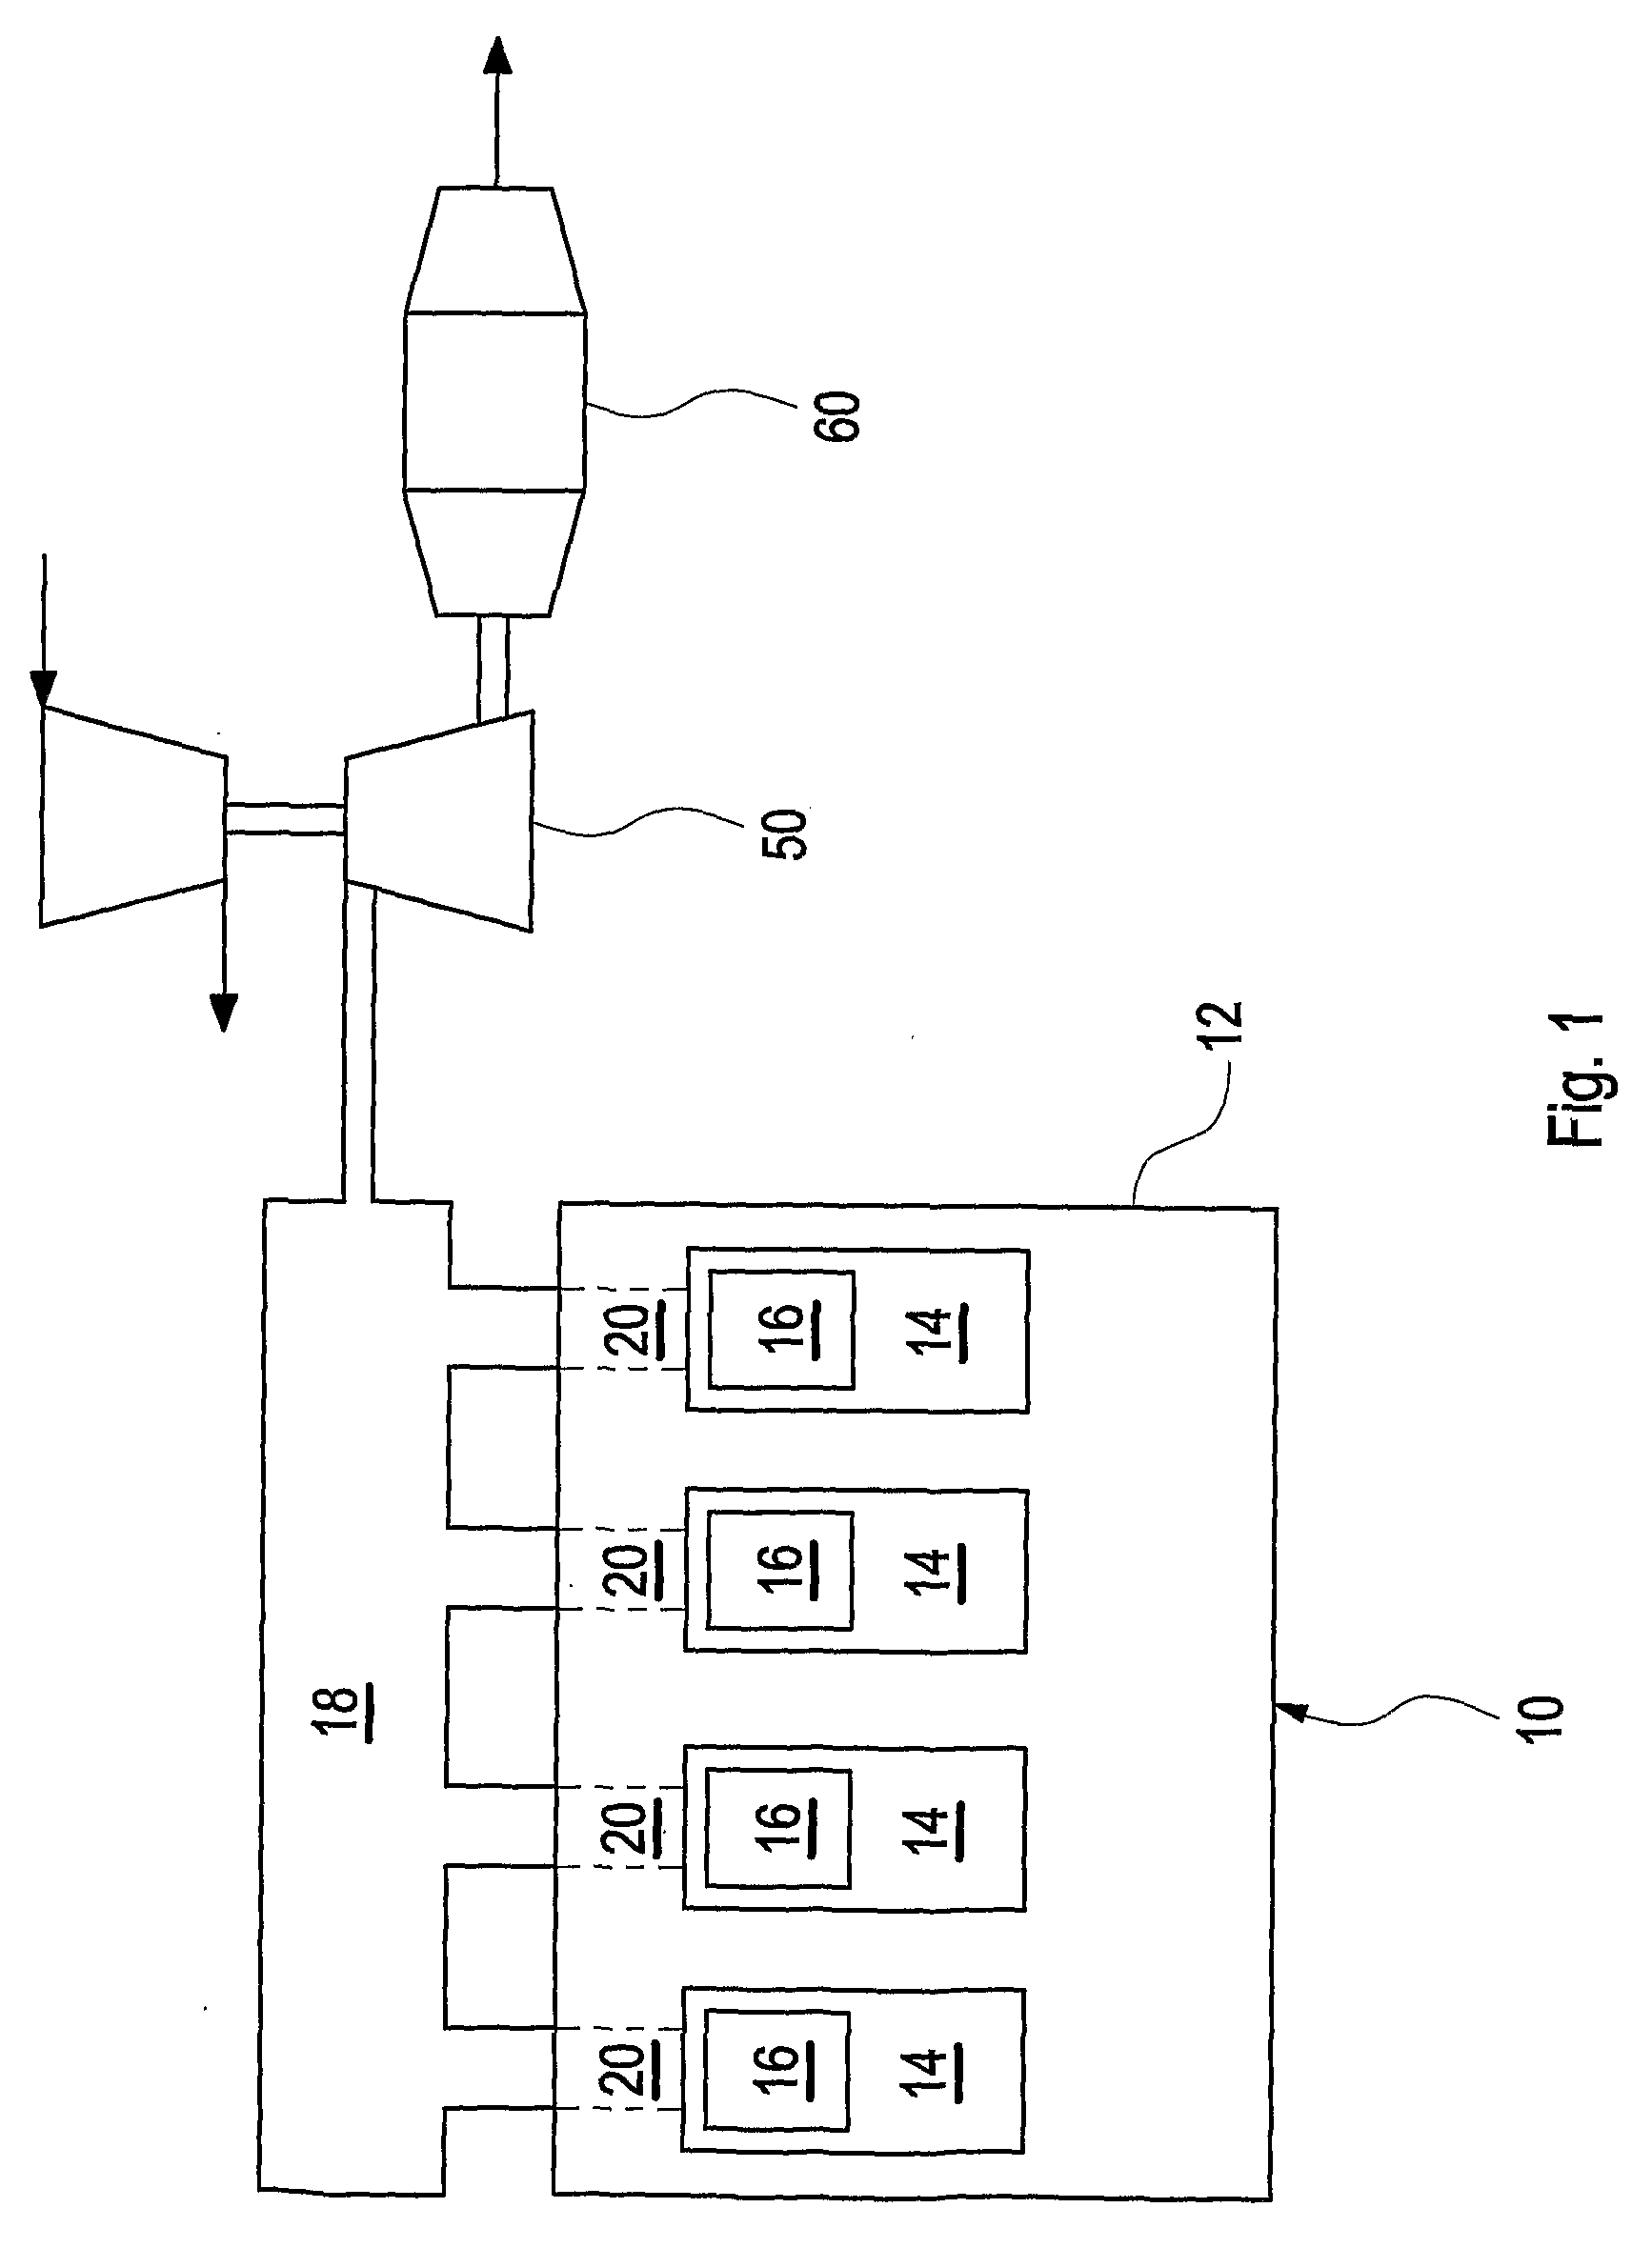 Method for coating an exhaust port and apparatus for performing the method